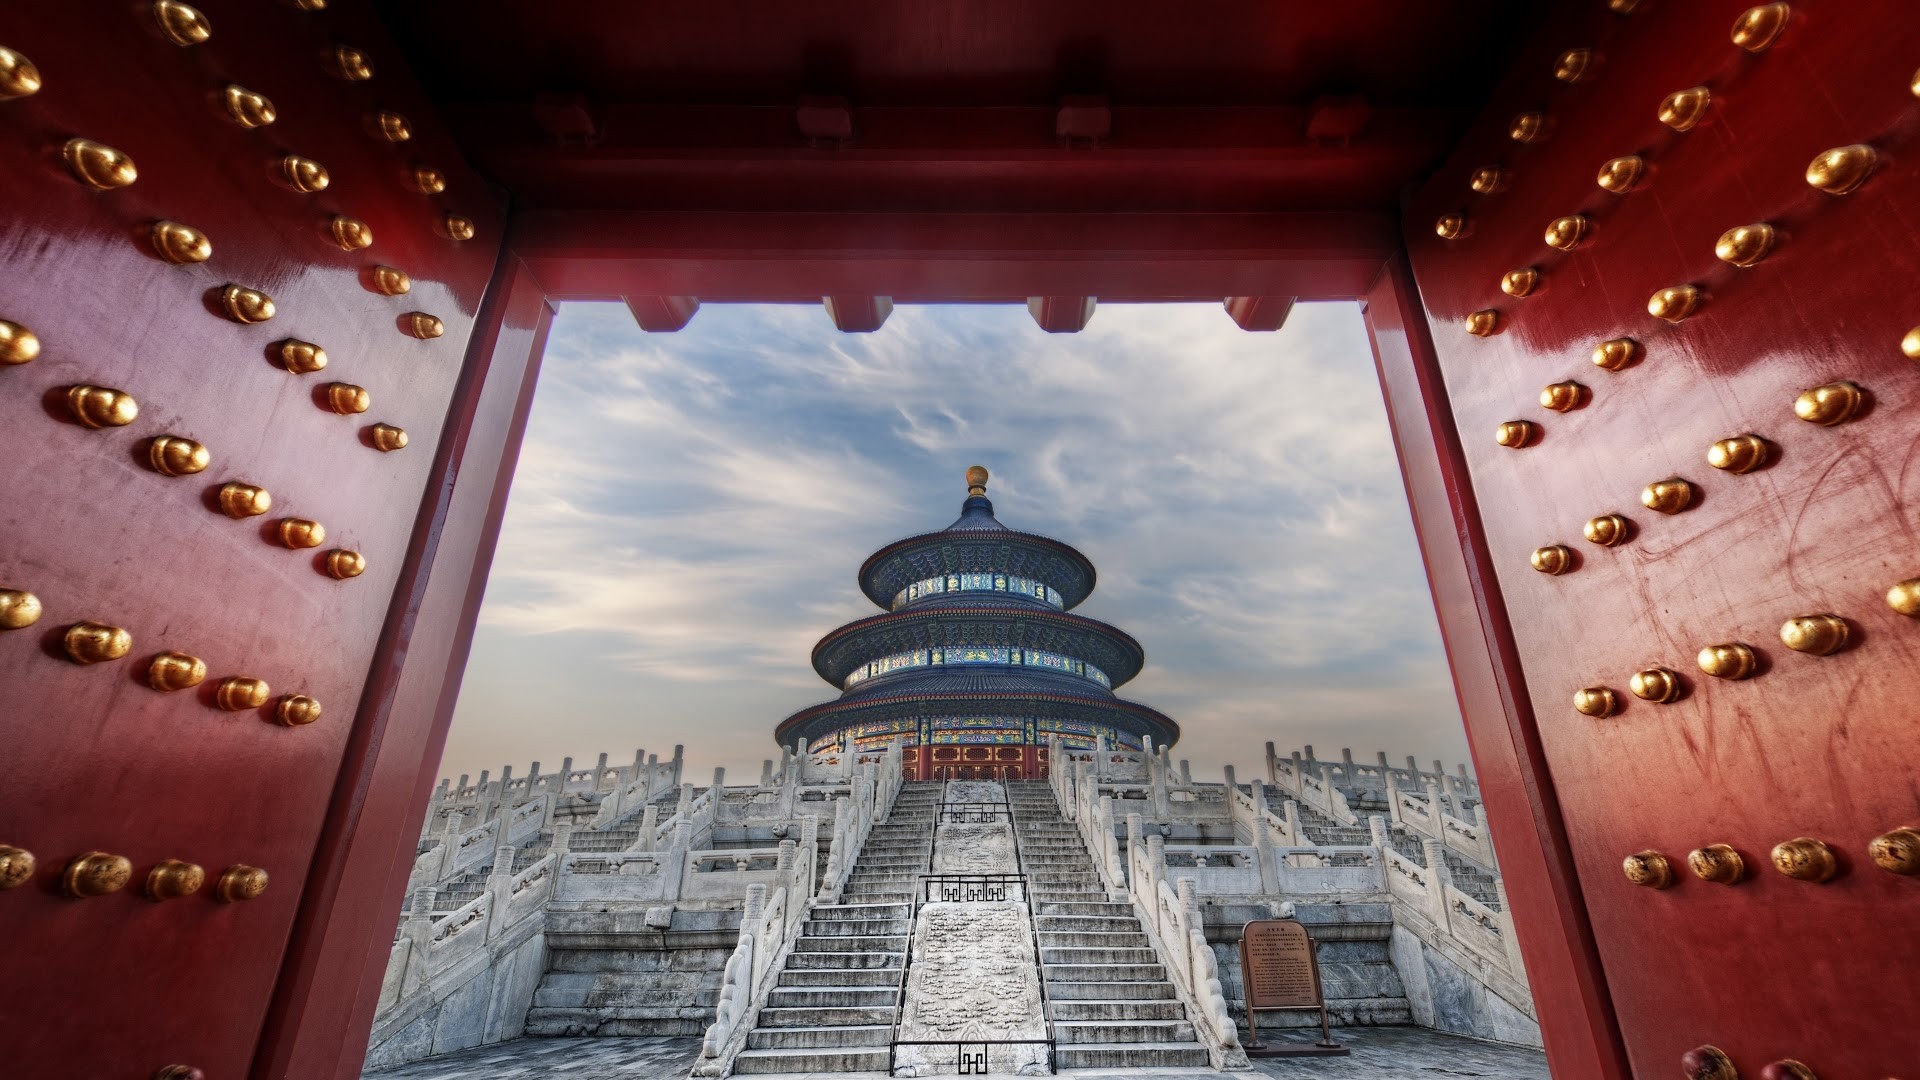 General 1920x1080 Beijing Temple of Heaven nature landscape China